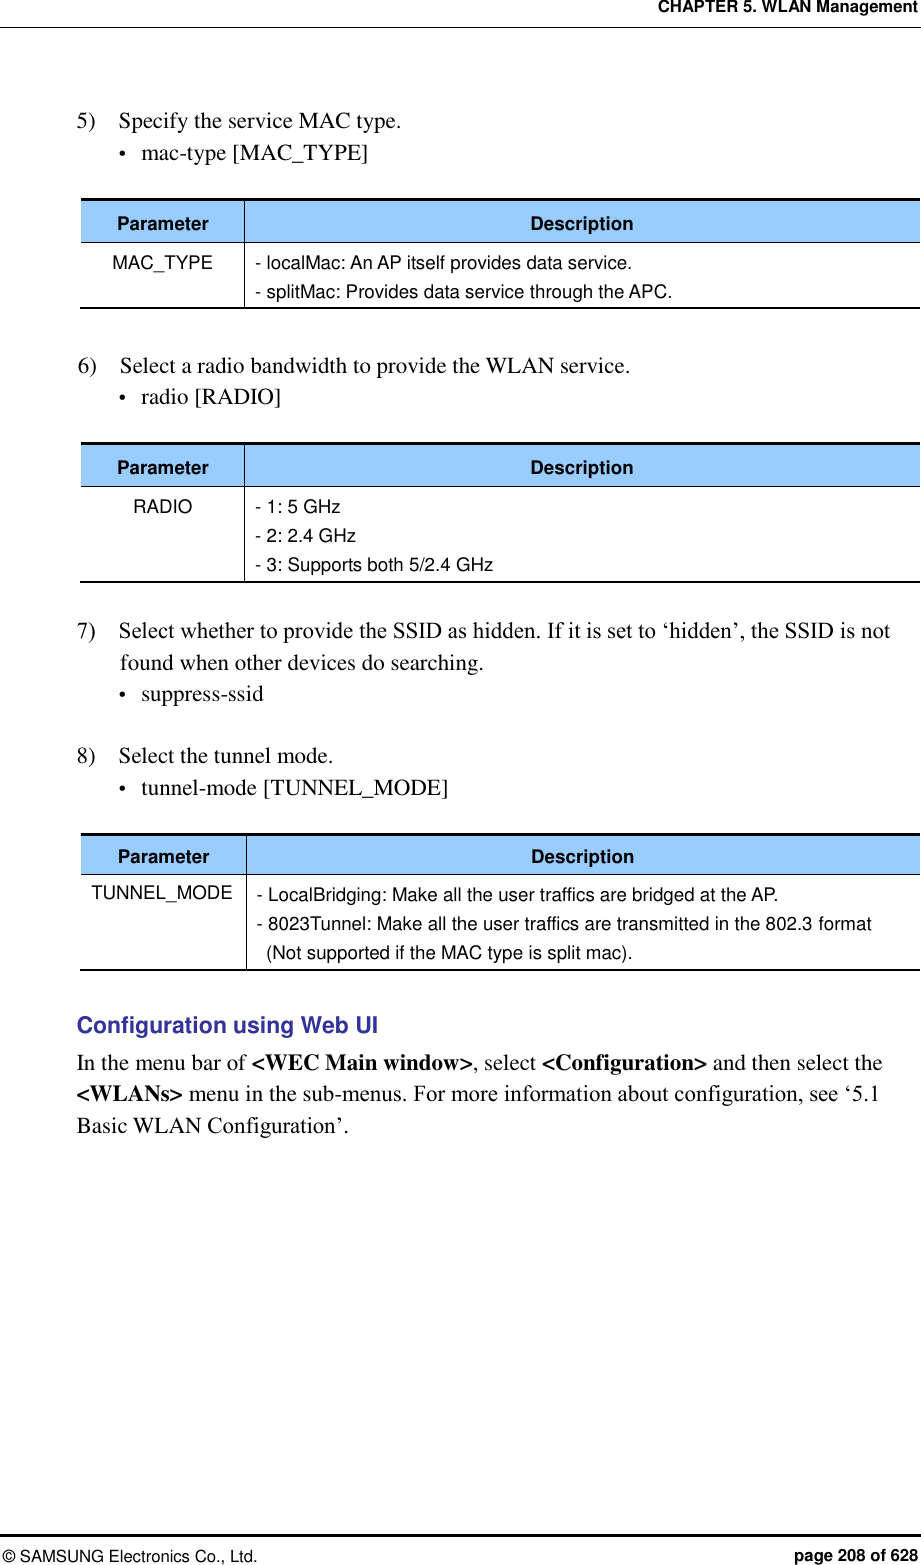 CHAPTER 5. WLAN Management ©  SAMSUNG Electronics Co., Ltd.  page 208 of 628 5)    Specify the service MAC type.    mac-type [MAC_TYPE]  Parameter Description MAC_TYPE - localMac: An AP itself provides data service. - splitMac: Provides data service through the APC.  6)    Select a radio bandwidth to provide the WLAN service.  radio [RADIO]  Parameter Description RADIO - 1: 5 GHz - 2: 2.4 GHz - 3: Supports both 5/2.4 GHz  7)    Select whether to provide the SSID as hidden. If it is set to ‘hidden’, the SSID is not found when other devices do searching.    suppress-ssid  8)    Select the tunnel mode.    tunnel-mode [TUNNEL_MODE]  Parameter Description TUNNEL_MODE - LocalBridging: Make all the user traffics are bridged at the AP. - 8023Tunnel: Make all the user traffics are transmitted in the 802.3 format (Not supported if the MAC type is split mac).  Configuration using Web UI In the menu bar of &lt;WEC Main window&gt;, select &lt;Configuration&gt; and then select the &lt;WLANs&gt; menu in the sub-menus. For more information about configuration, see ‘5.1 Basic WLAN Configuration’.  